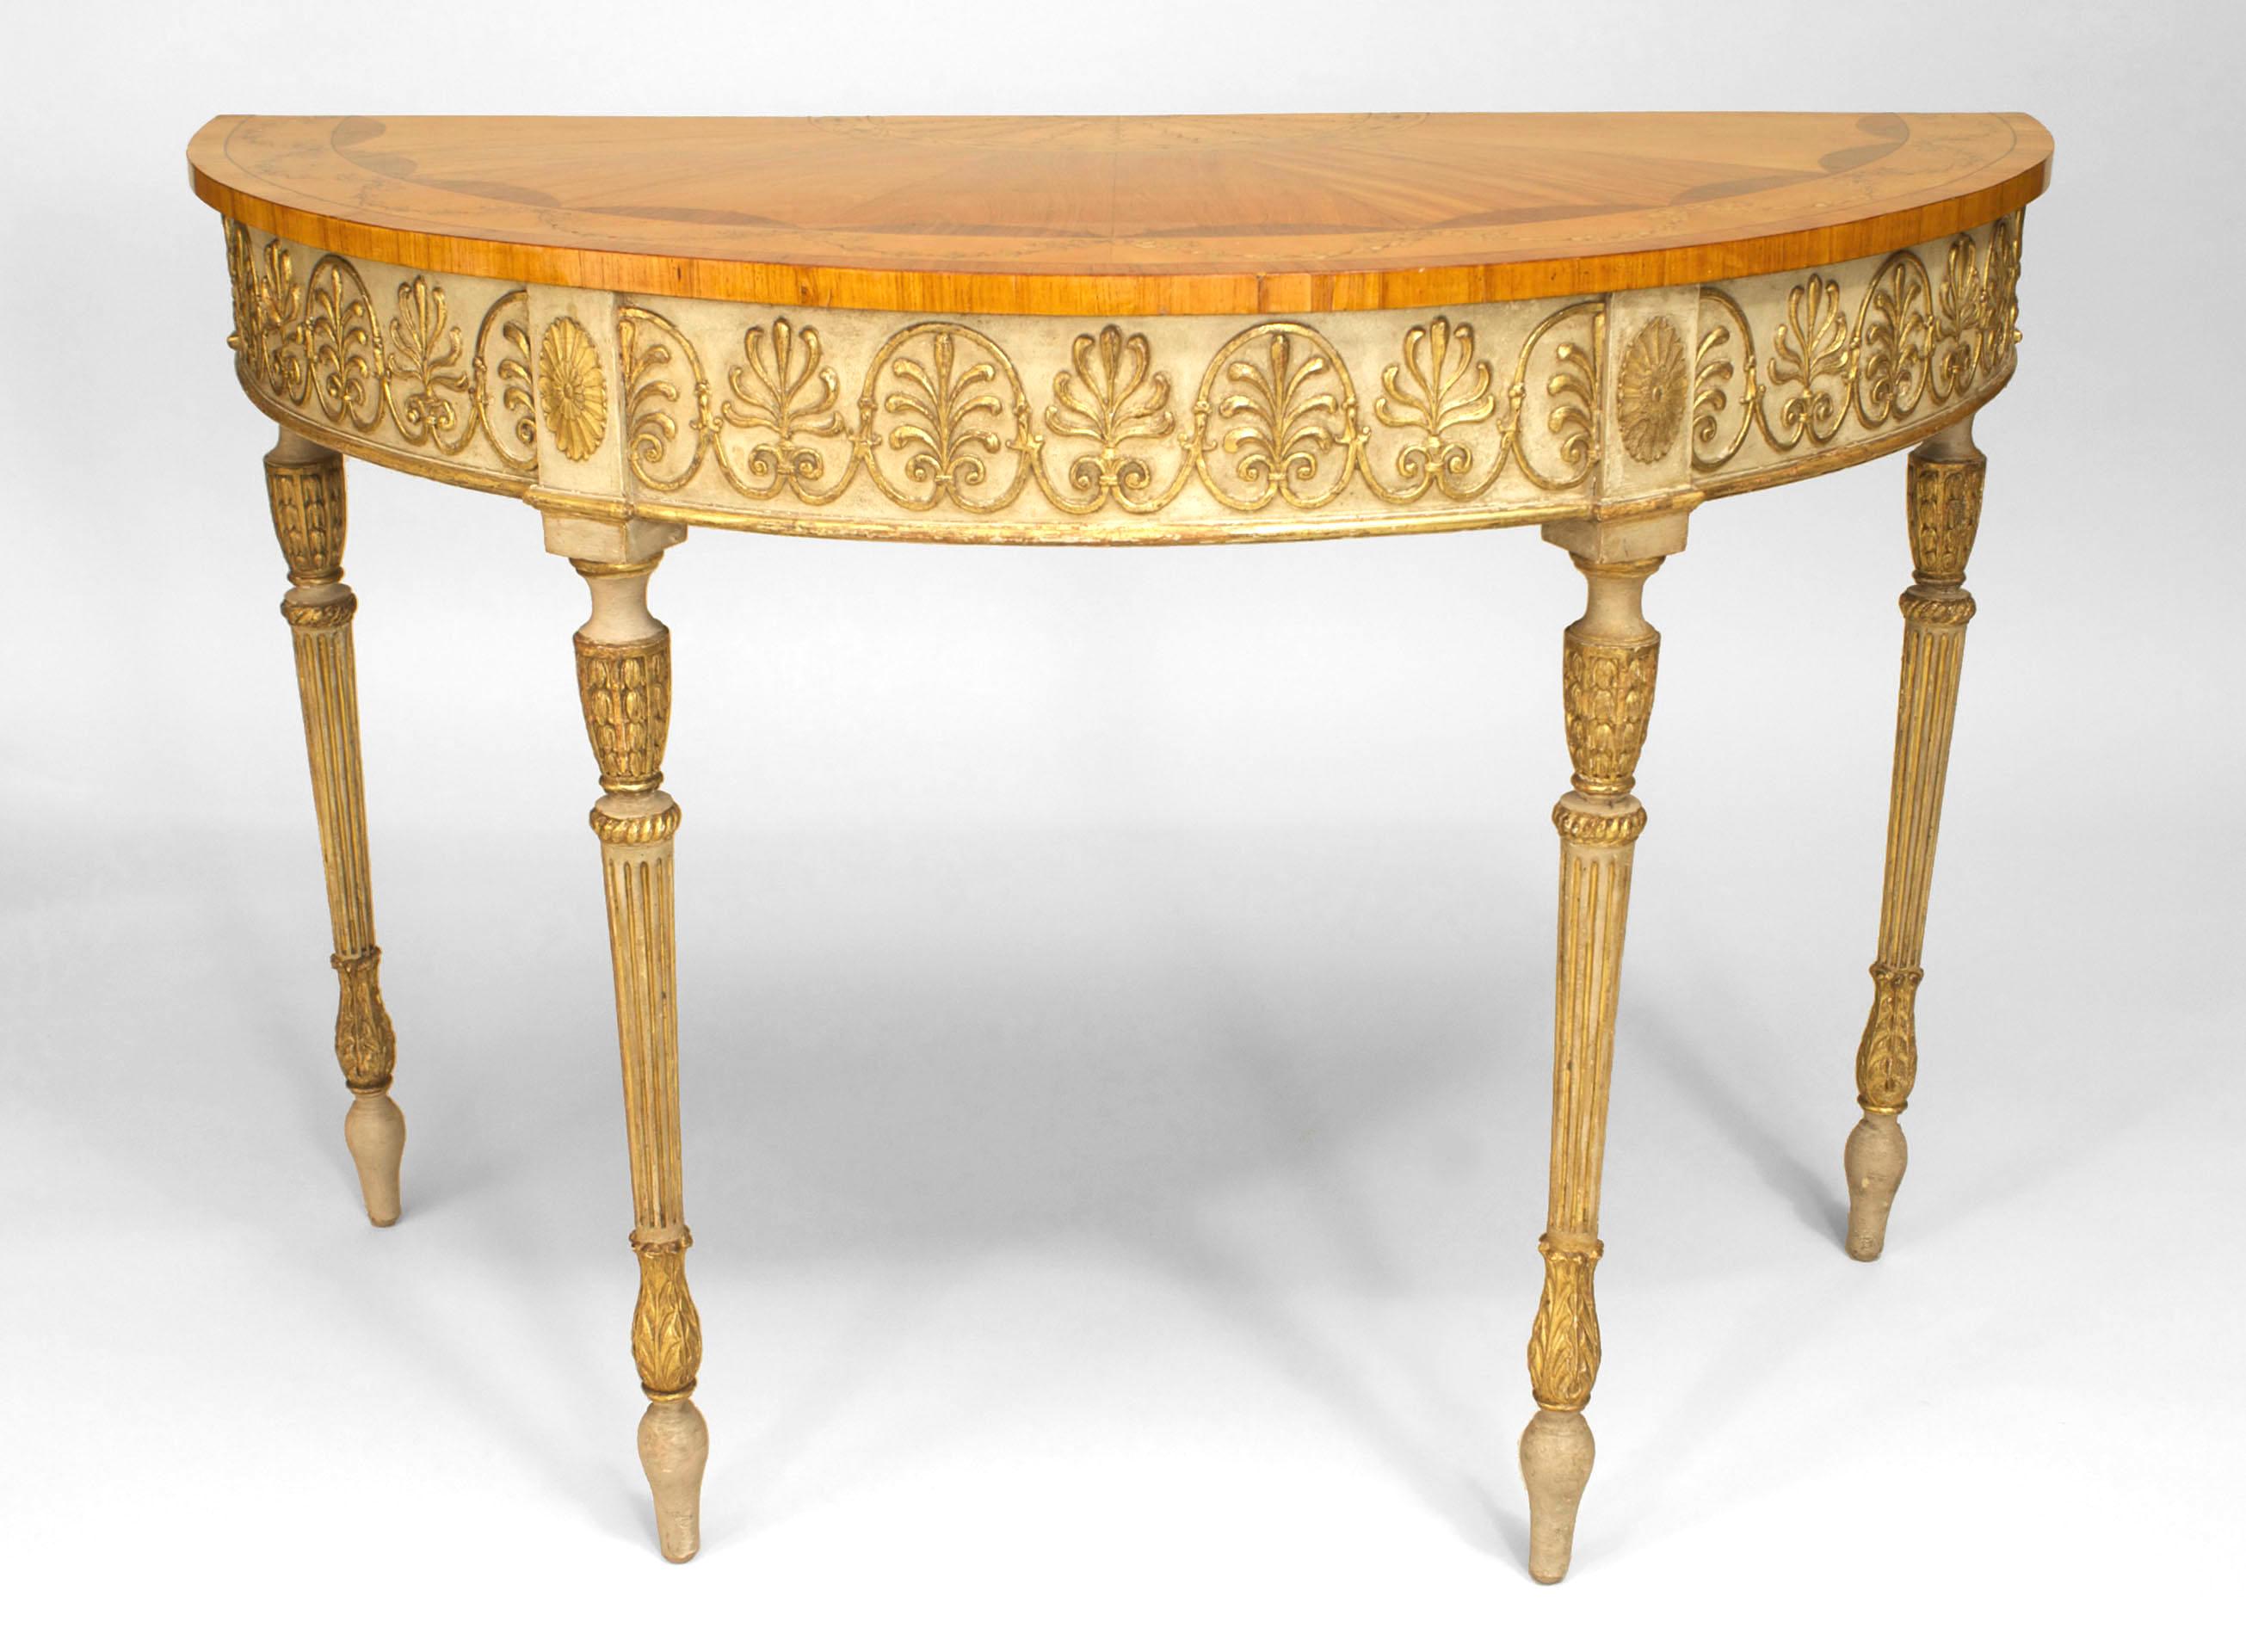 English George III (circa 1780) cream painted and parcel-gilt carved and trimmed demilune console table with a satinwood and inlaid top having a festoon and sunburst design. (Manner of Robert Adam)
